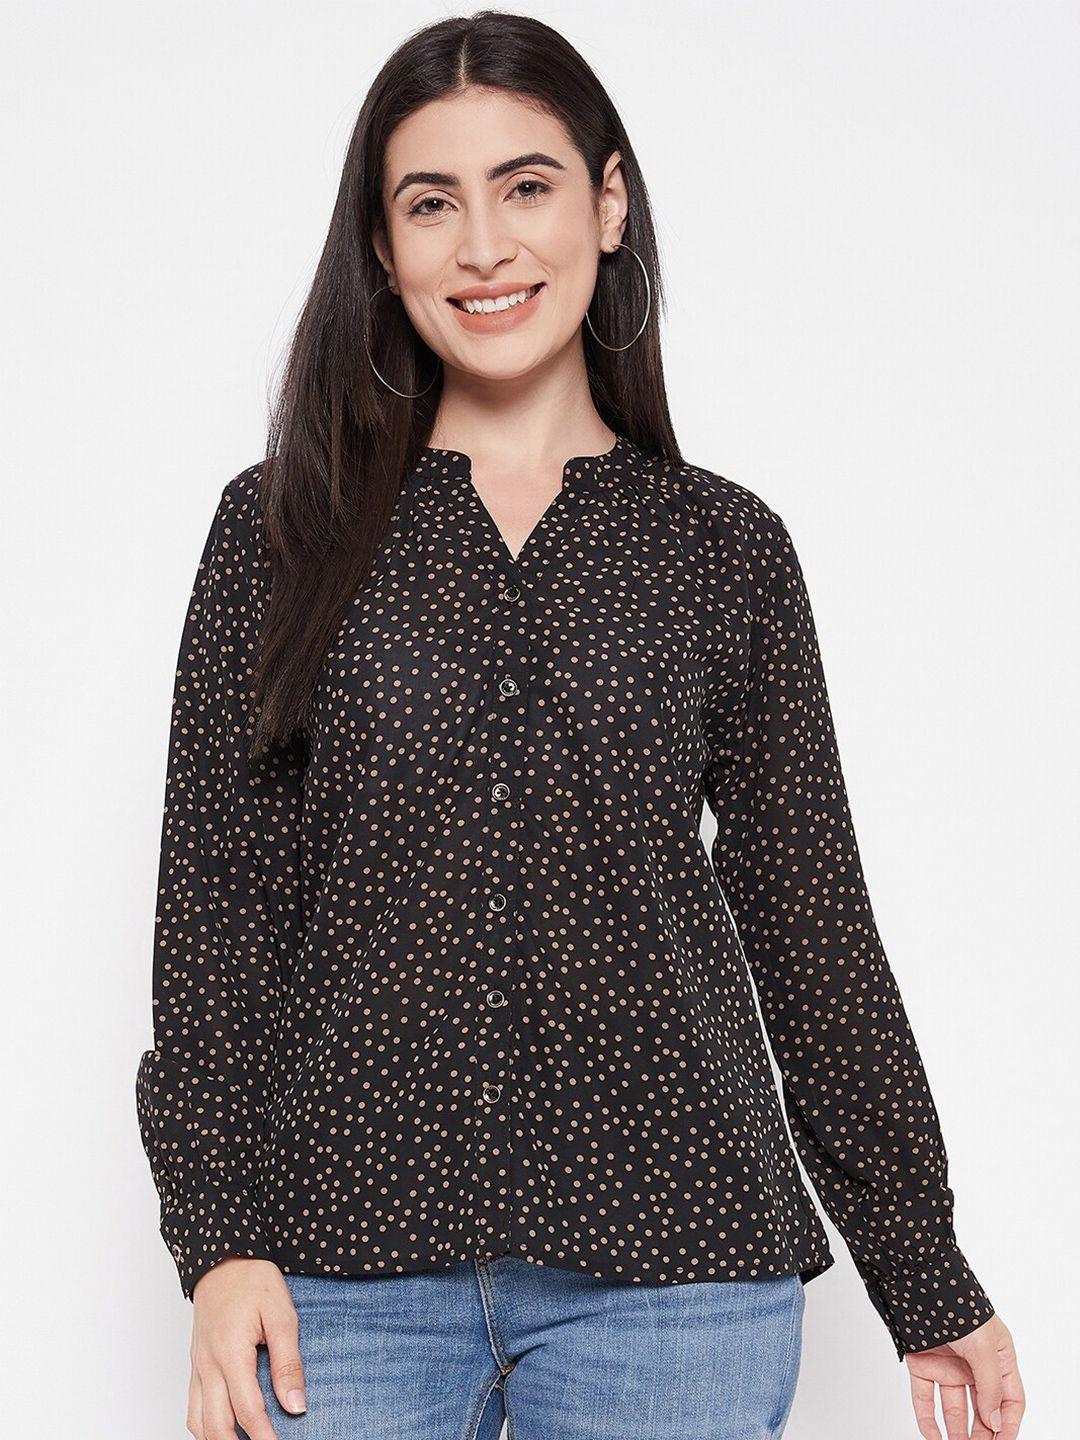 ruhaans polka dots printed classic georgette casual shirt